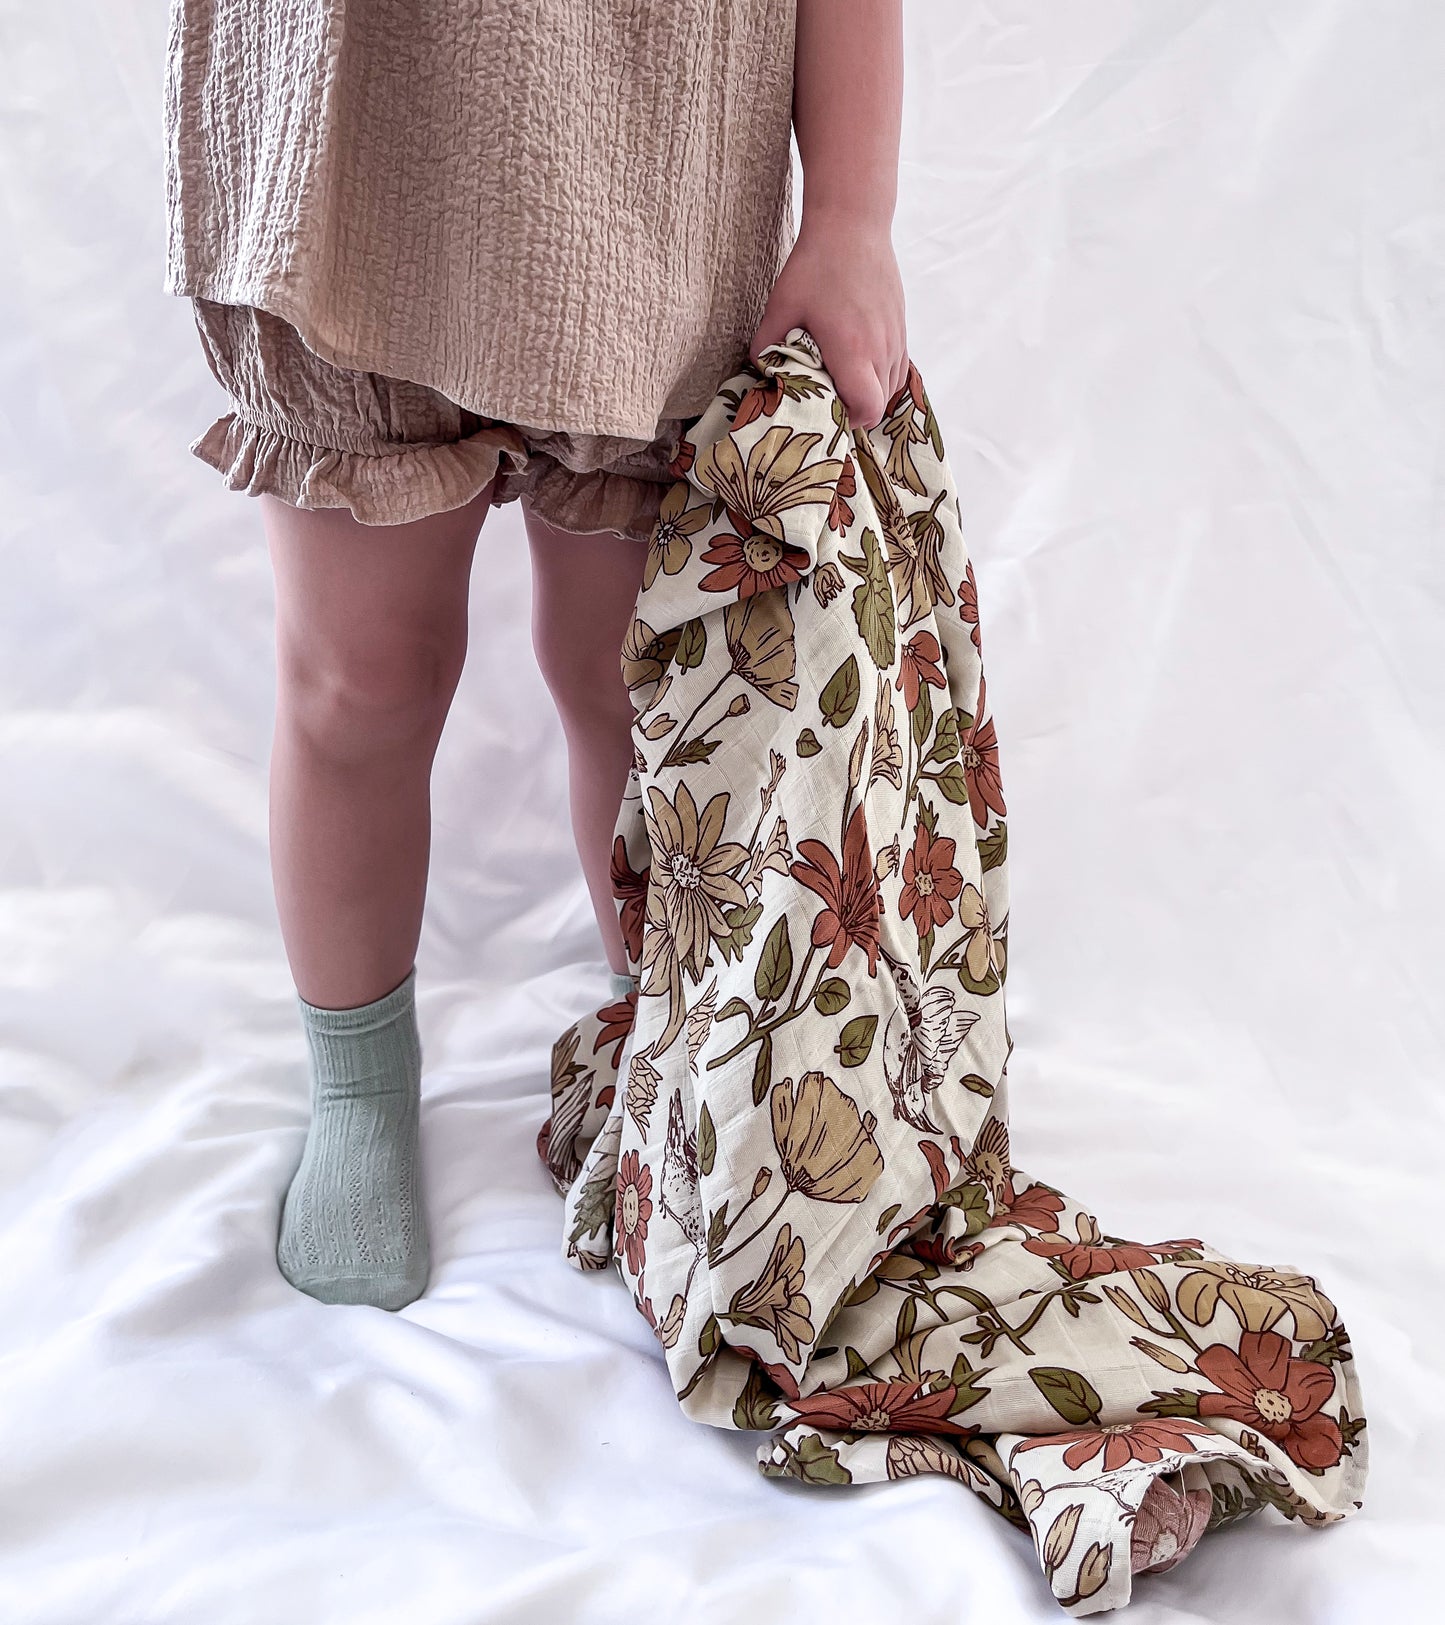 The Brown Floral Muslin Swaddle